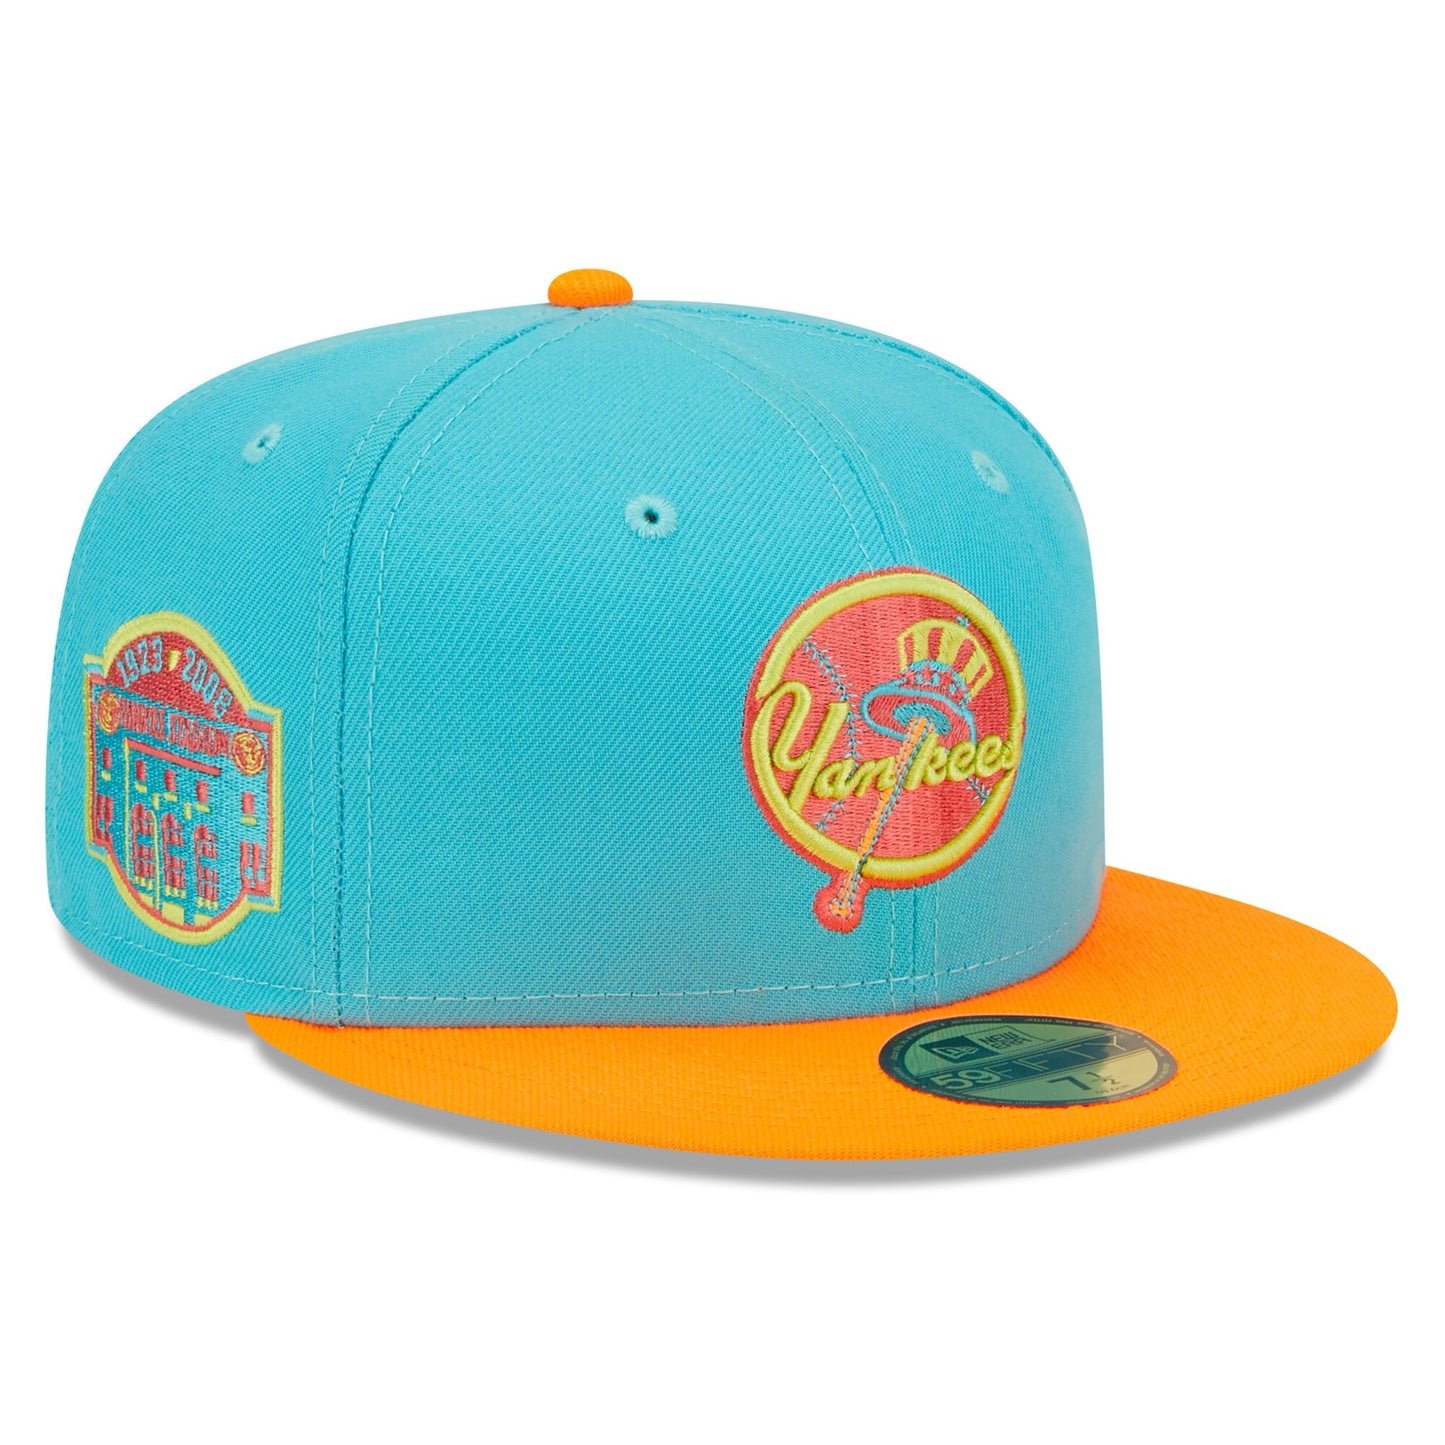 New York Yankees New Era Vice Highlighter 59FIFTY Fitted Hat - Blue/Orange